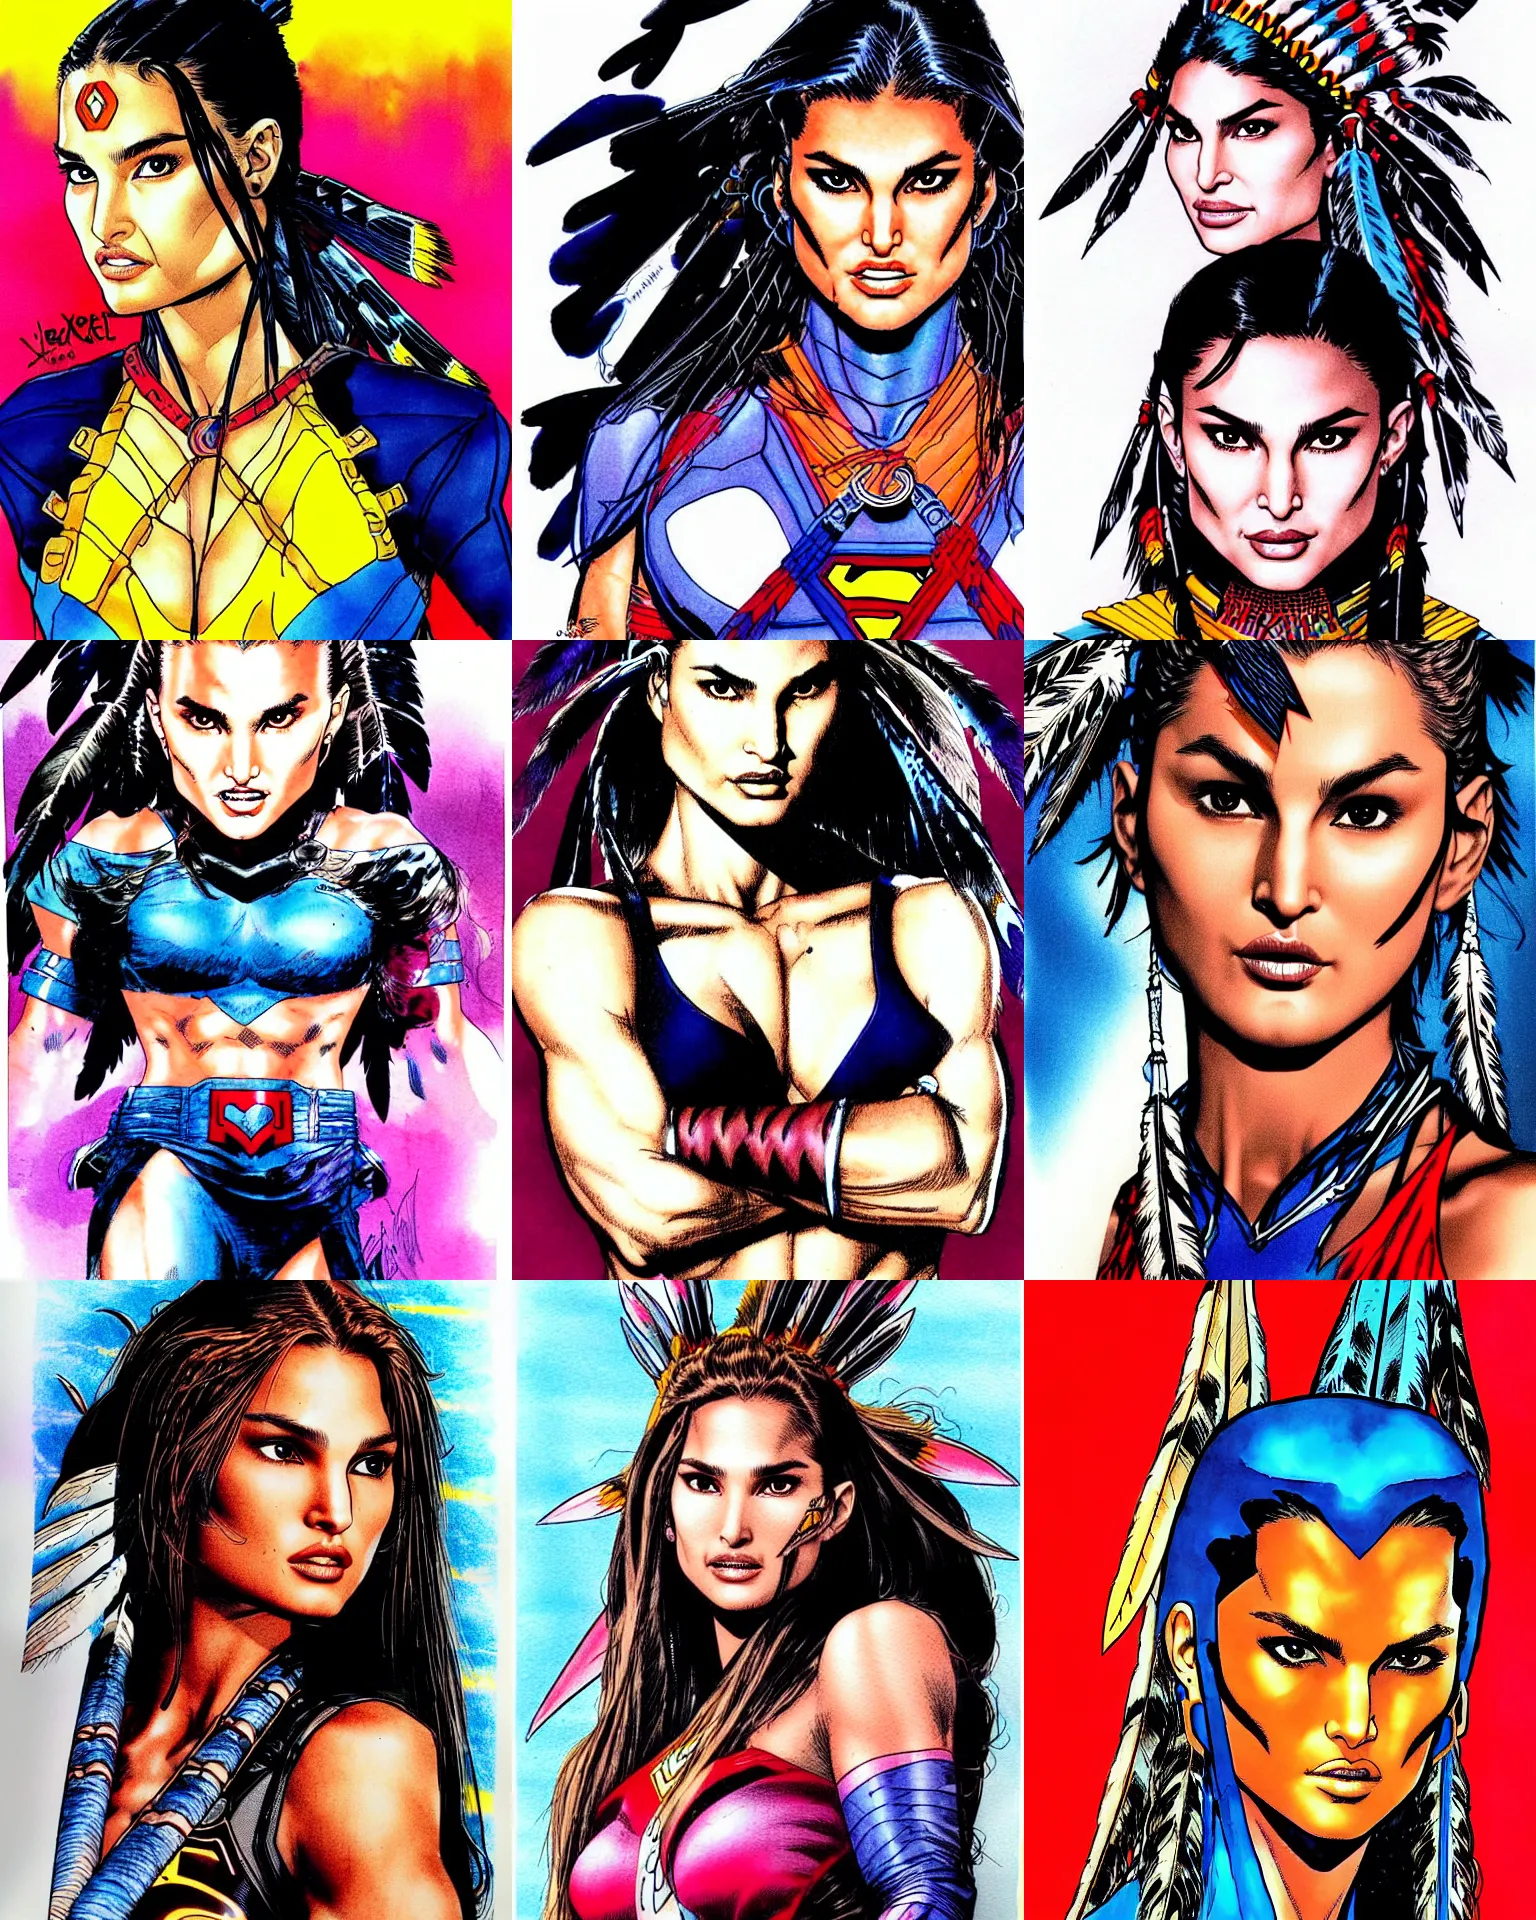 Prompt: jim lee!!! ink colorised airbrushed gouache sketch by jim lee close up headshot of native indian chinese natalie portman cindy crawford in the style of jim lee, x - men superhero comic book character by jim lee